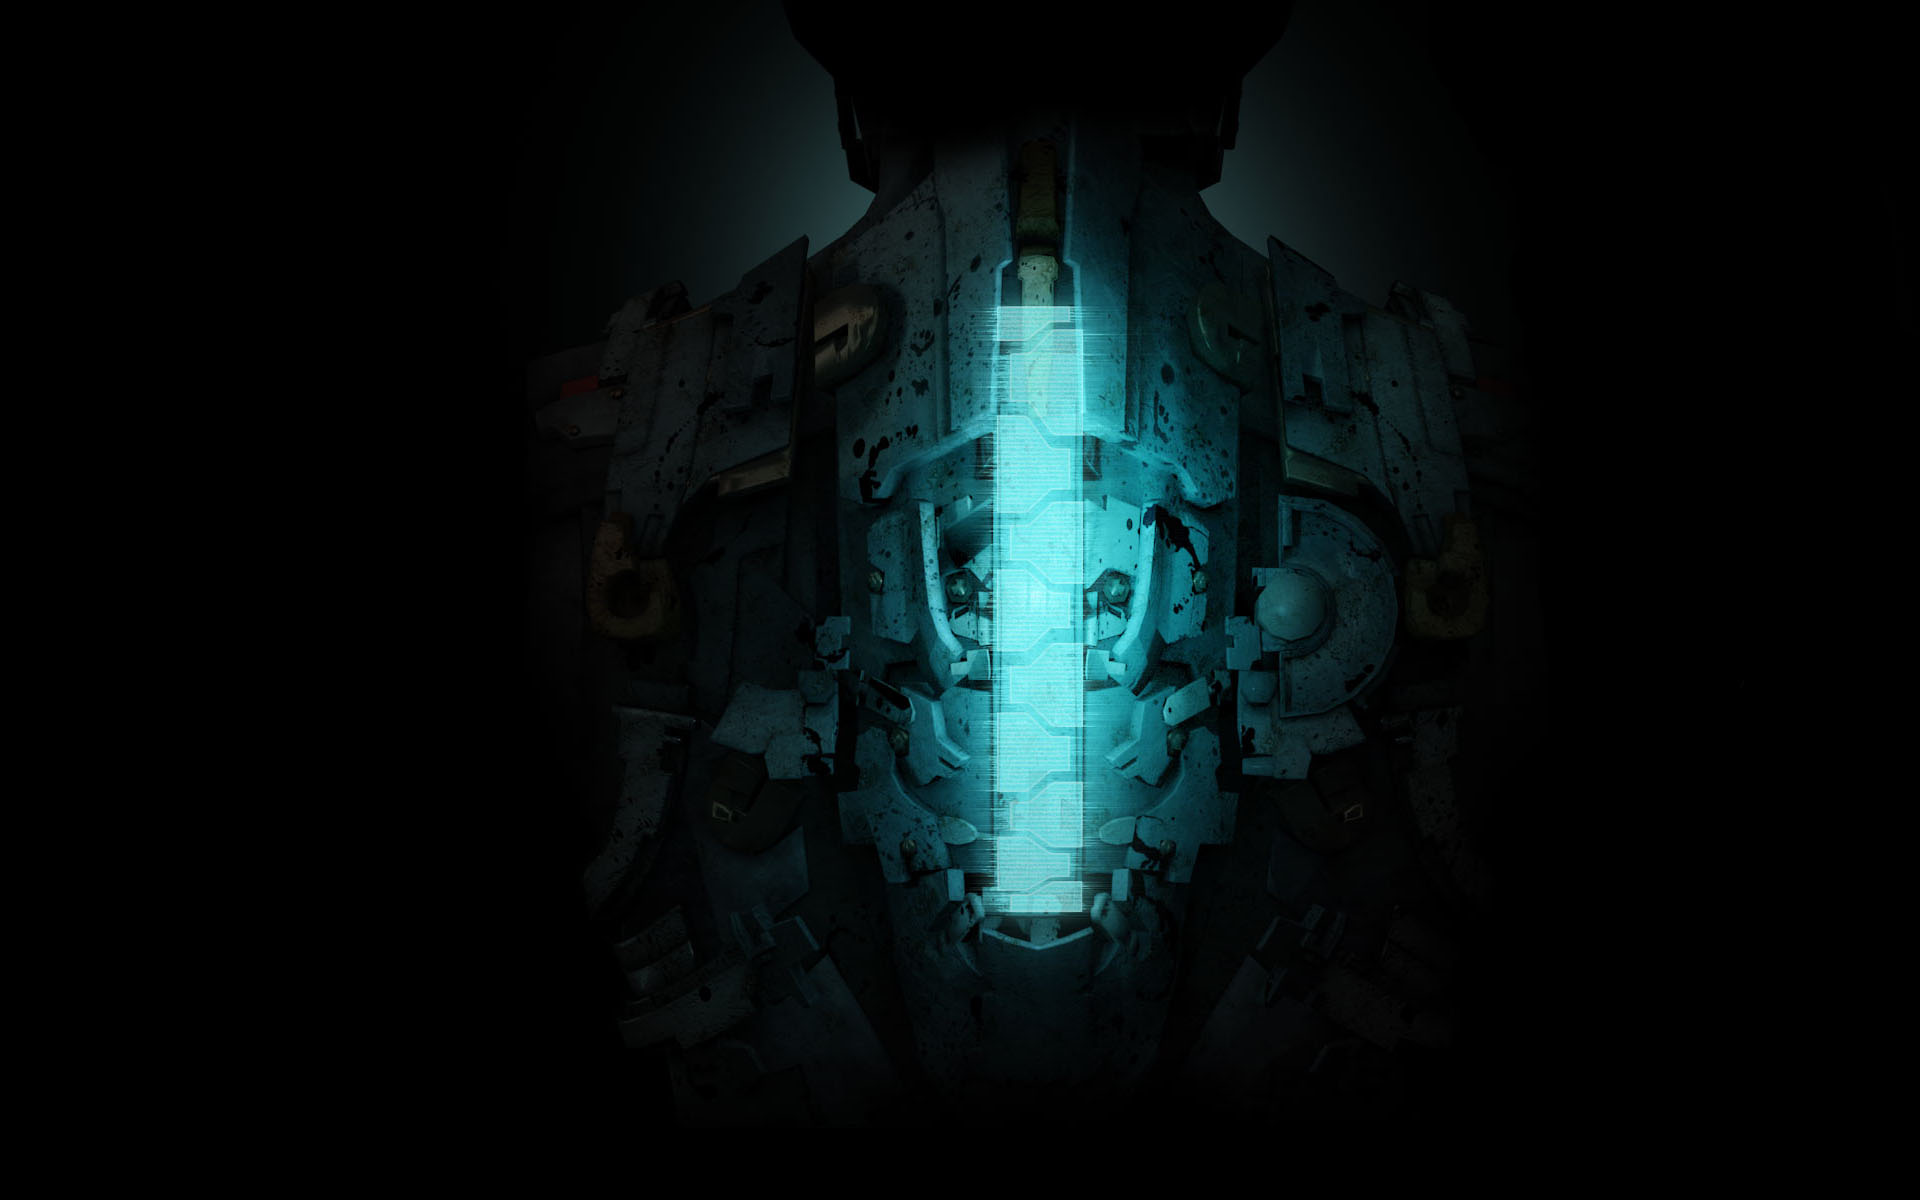 Video Game Dead Space 1920x1200